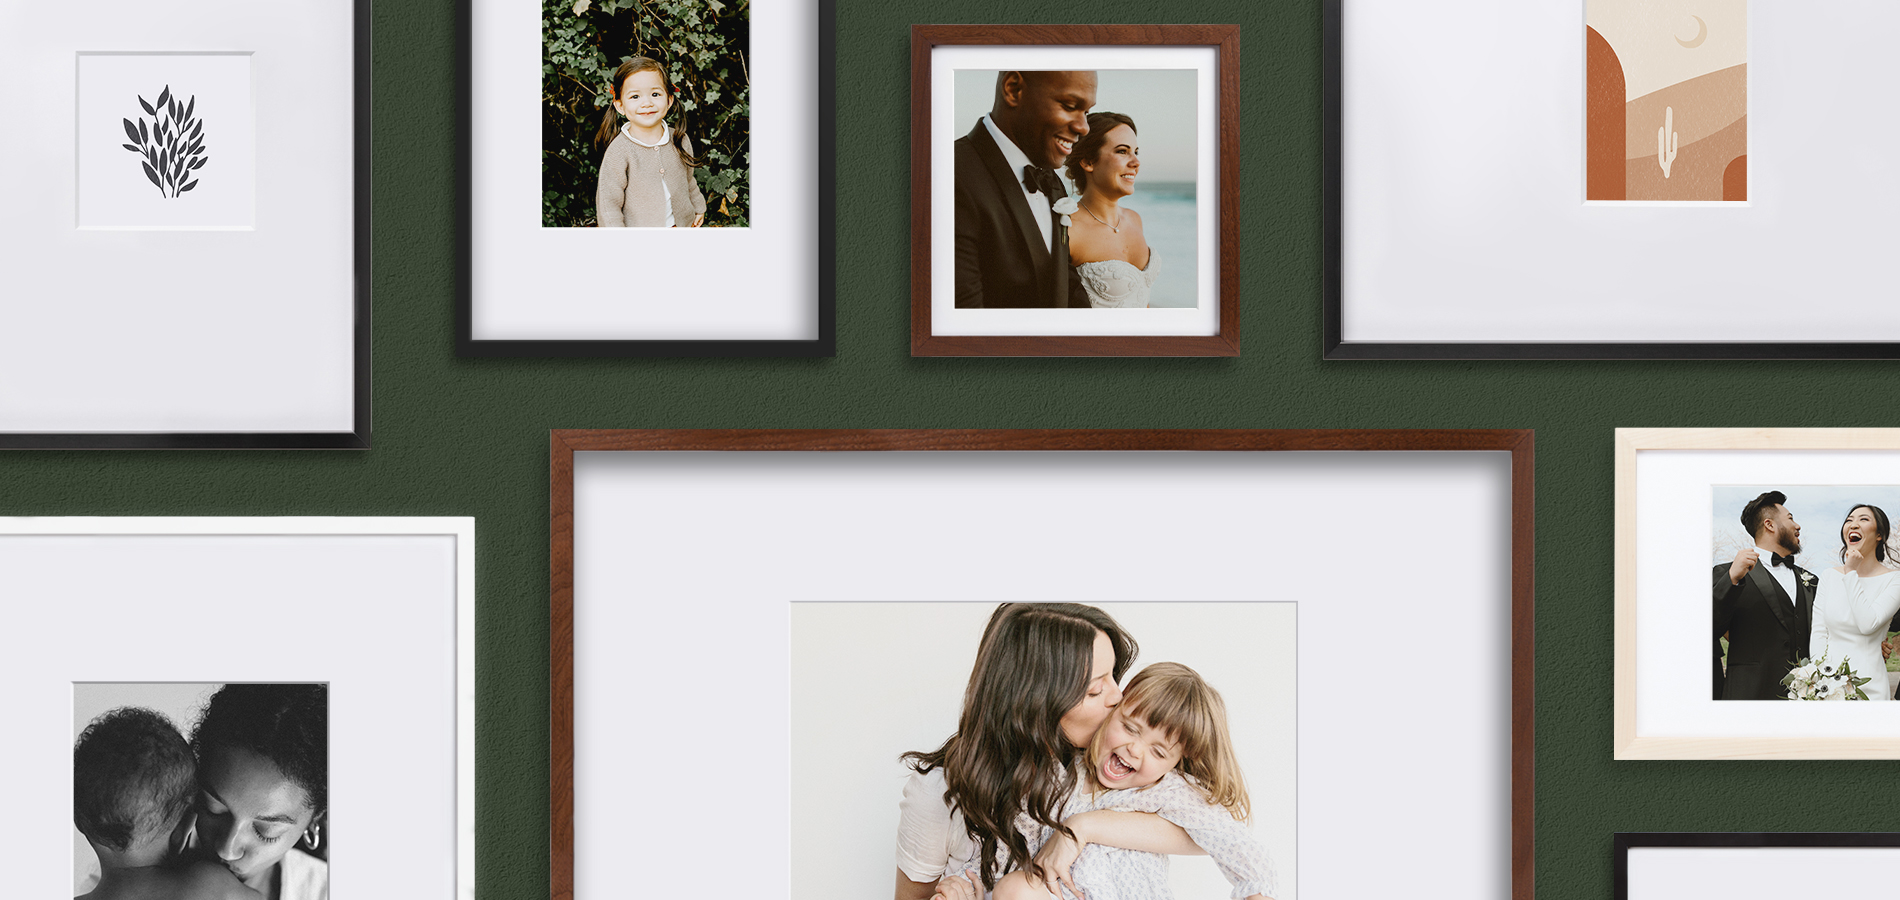 Gallery wall of Artifact Uprising frames featuring a variety of photos and mat sizes